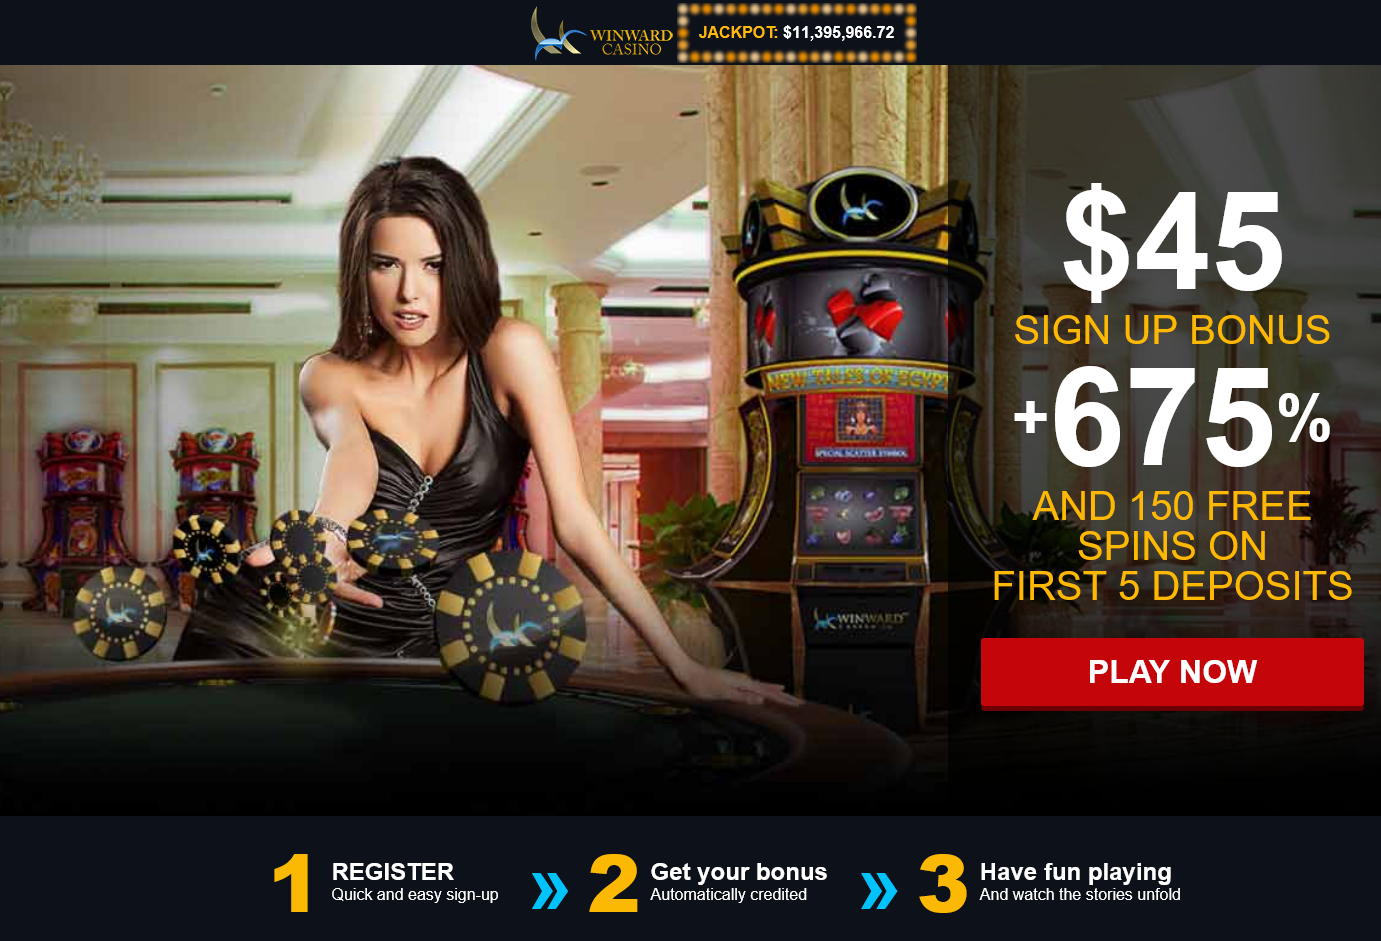 $50 SIGN UP BONUS + 200 % AND 30 FREE SPINS ON FIRST DEPOSIT